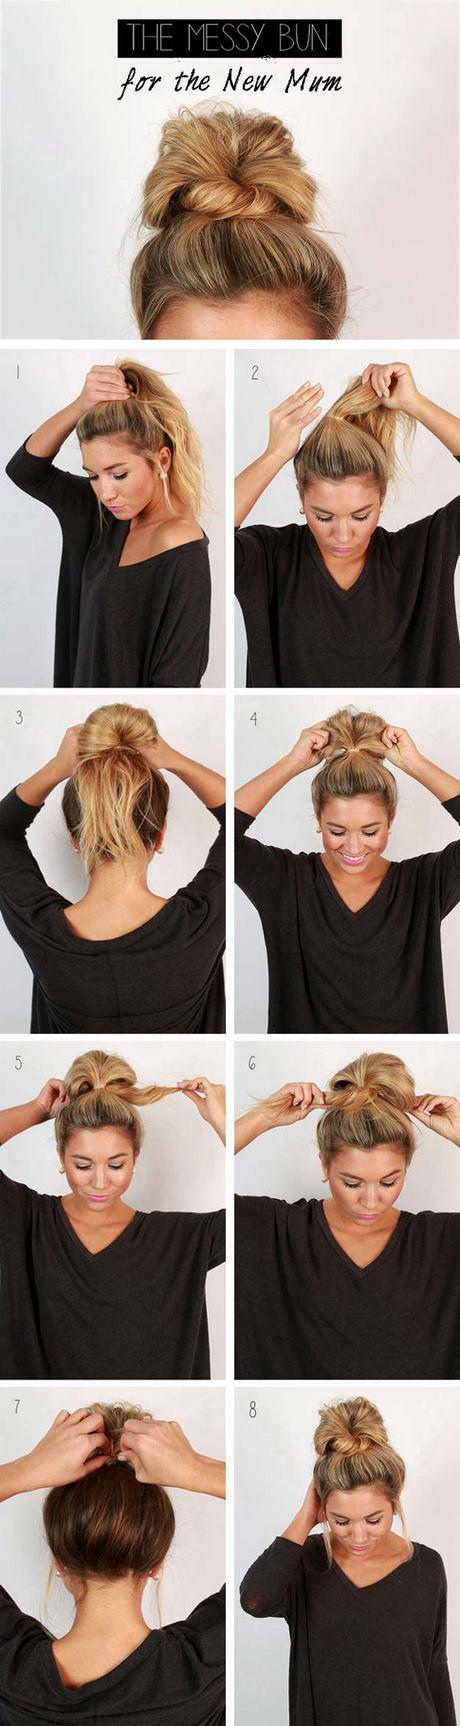 Cool easy quick hairstyles cool-easy-quick-hairstyles-31_4